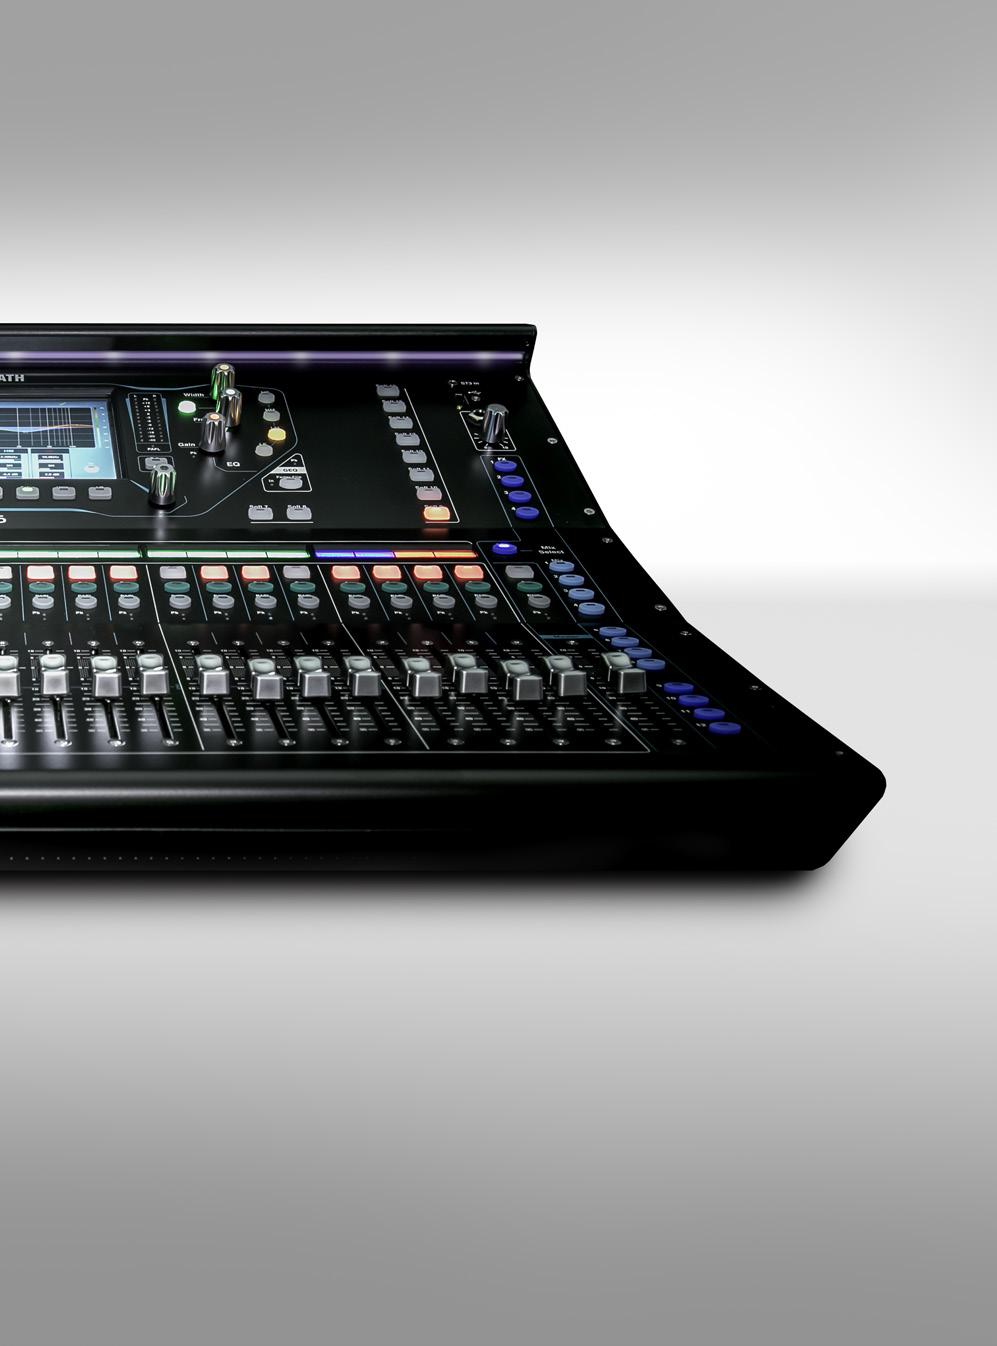 The Sound of Speed 96kHz digital mixers for live sound, AV and installation.